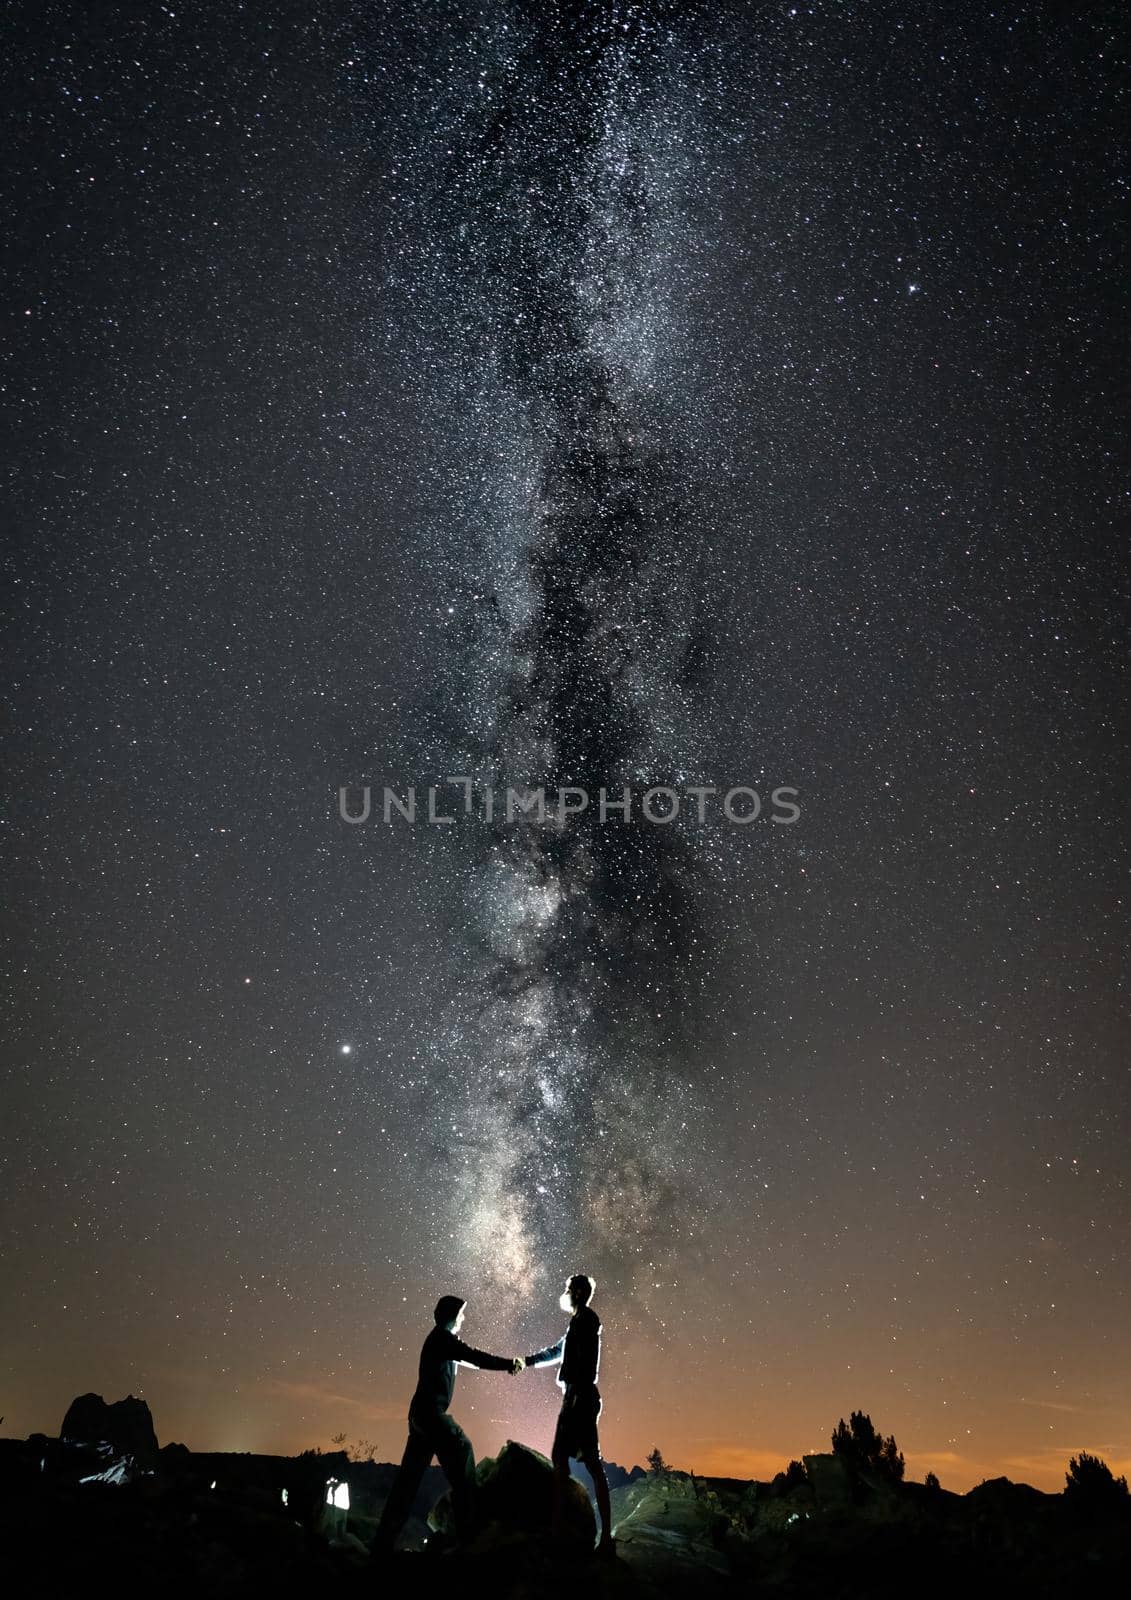 Two persons shaking hands against milky way by FerradalFCG